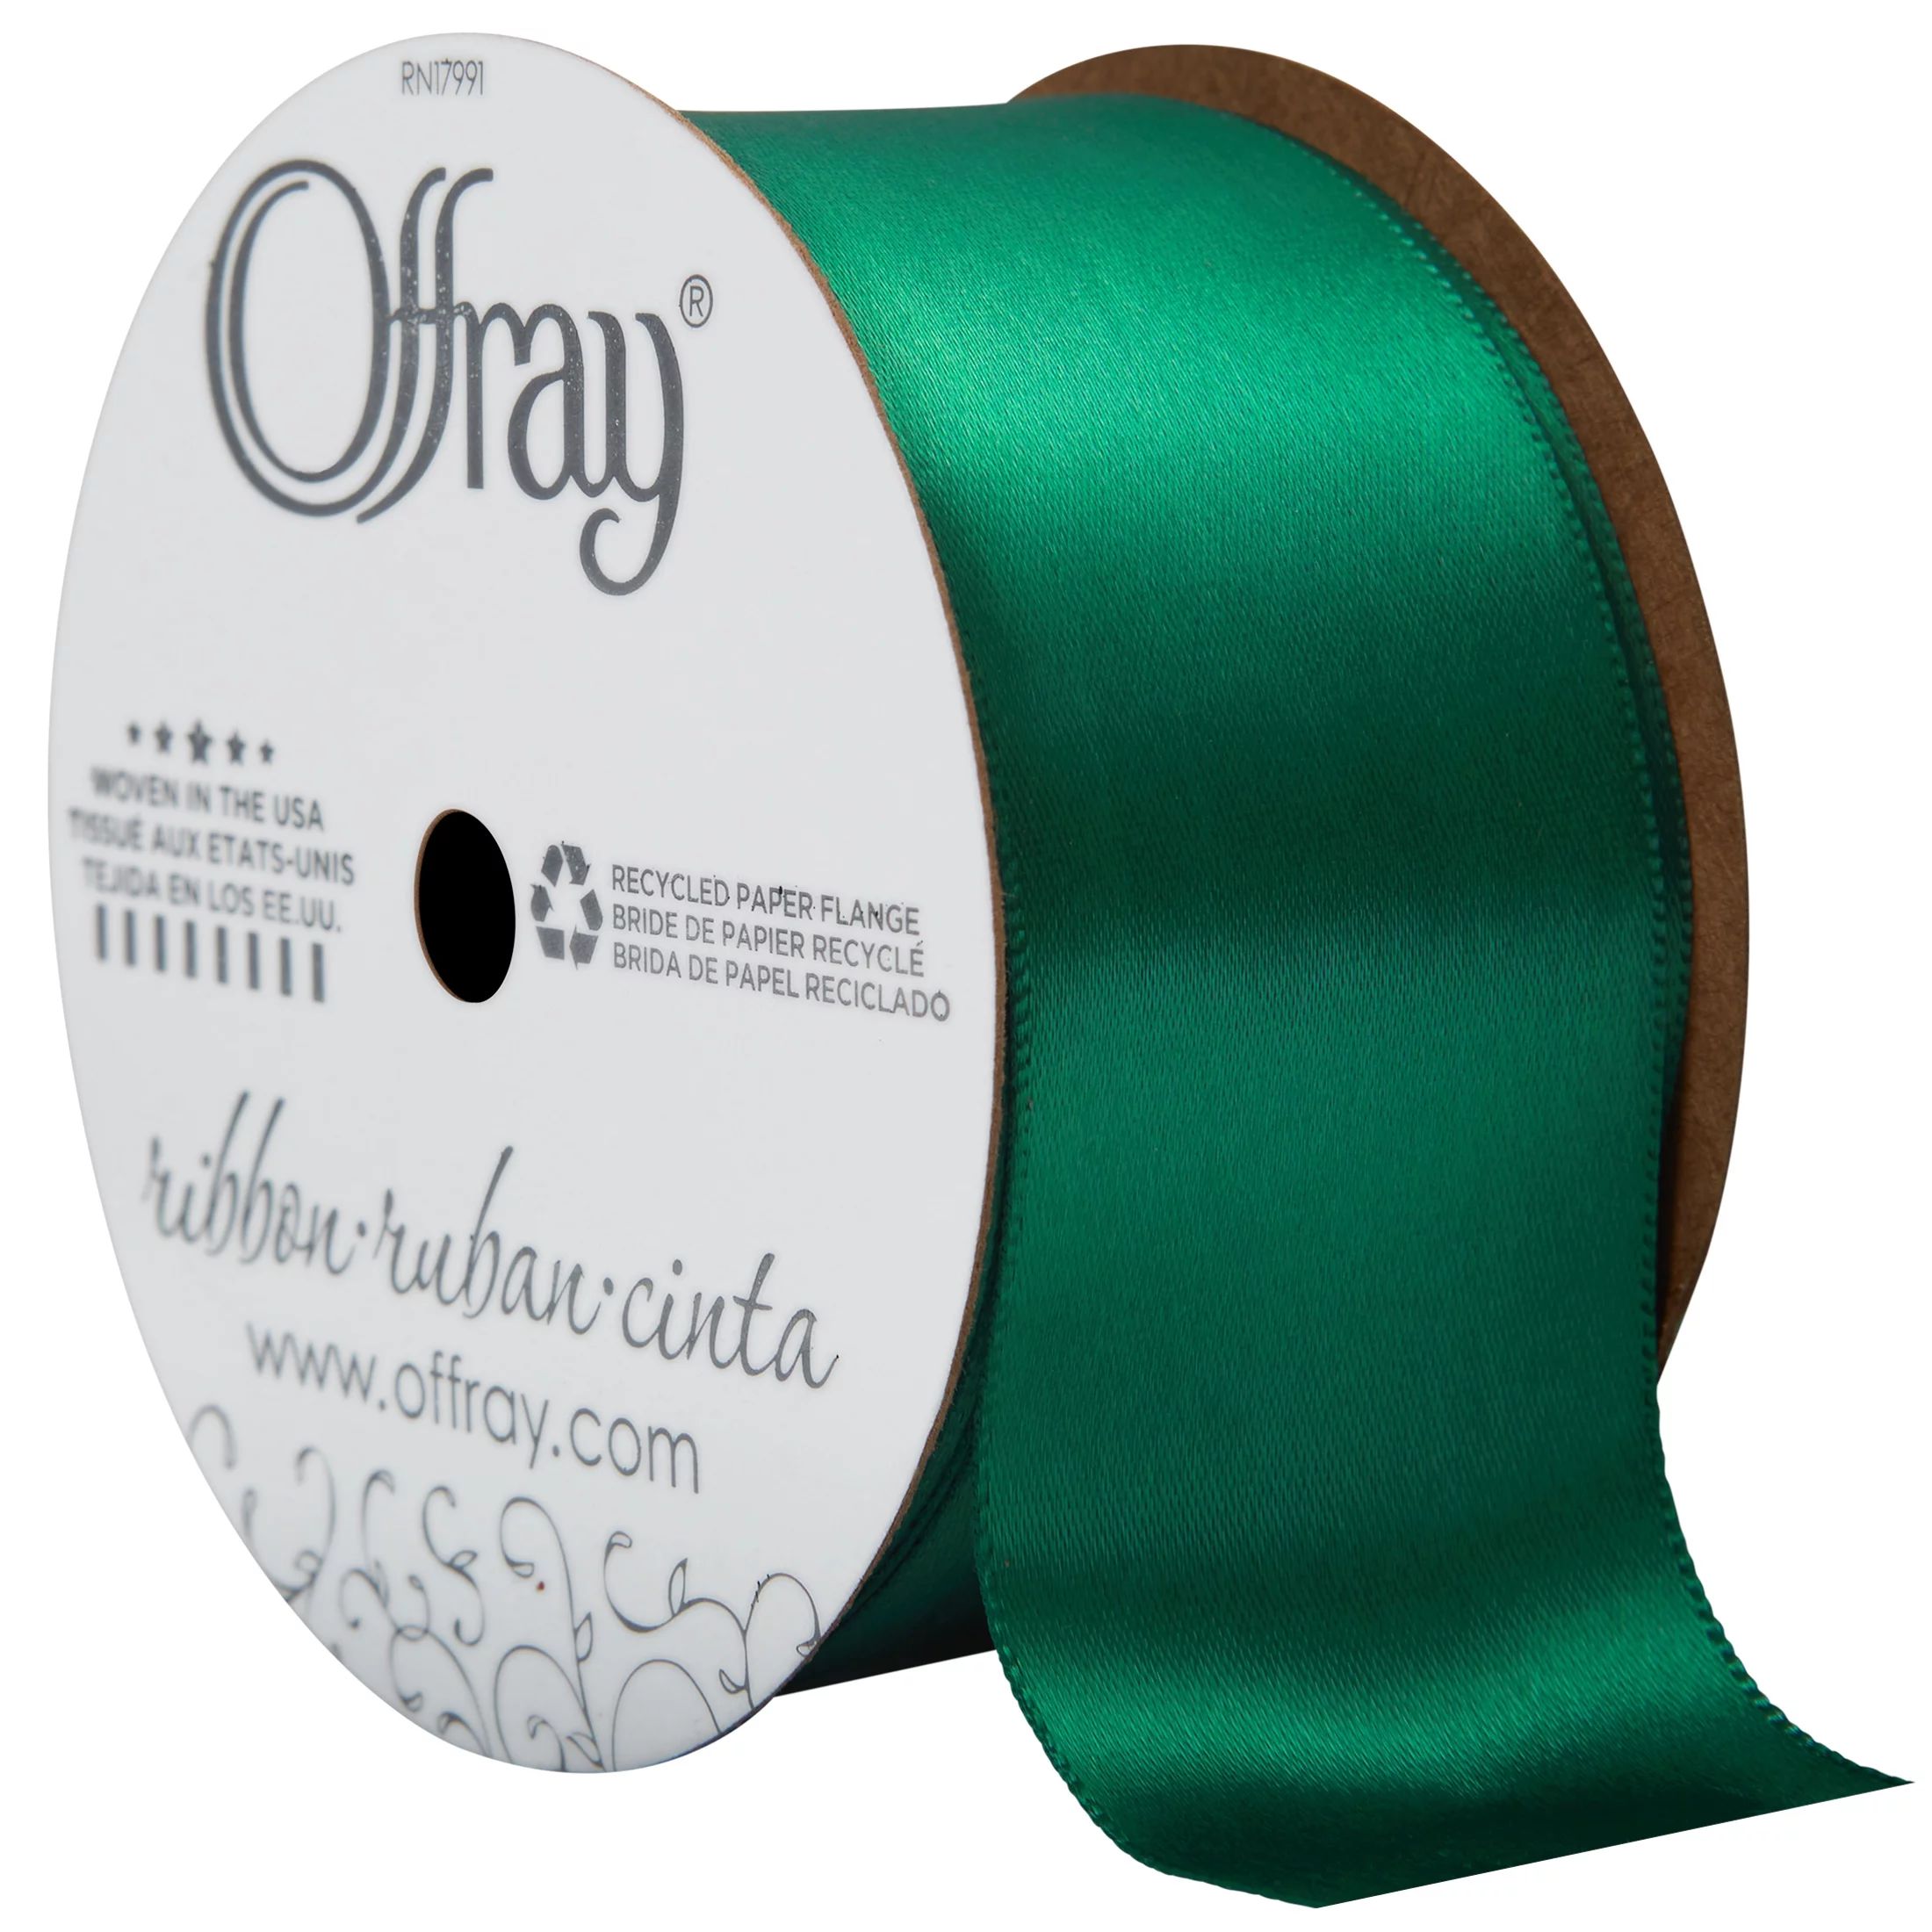 Offray Ribbon, Forest Green 1 1/2 inch Single Face Satin Polyester Ribbon, 12 feet | Walmart (US)